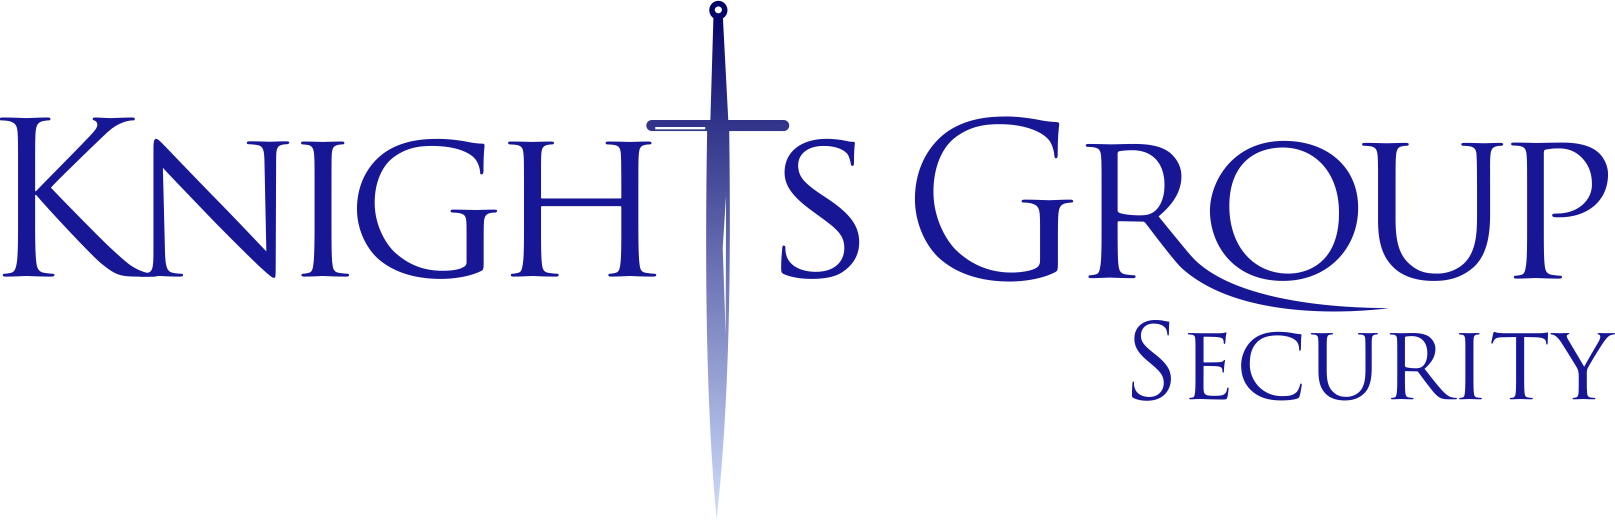 Knights Group Security Ltd